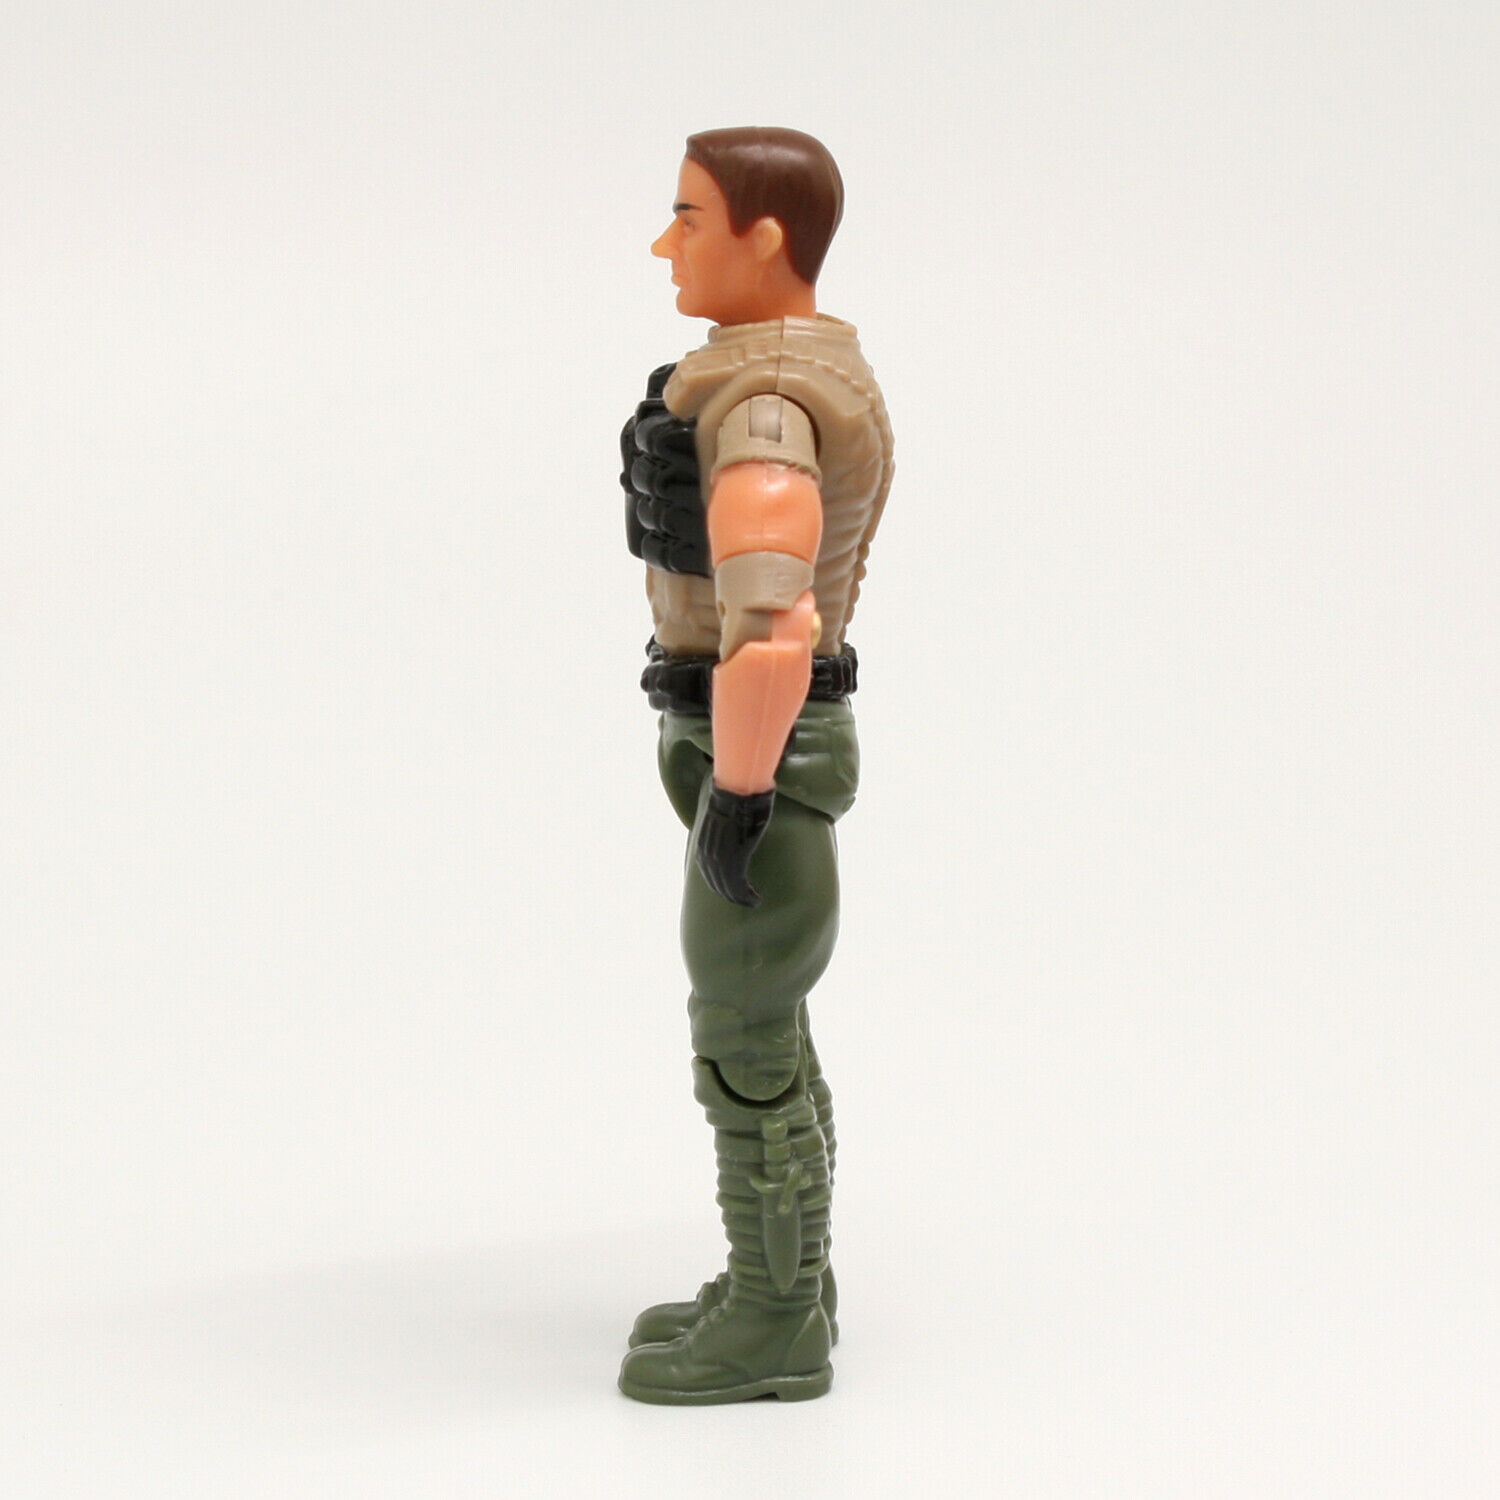 3rd and Final Round Of RARE UNRELEASED G.I.JOE PROTOTYPES AND